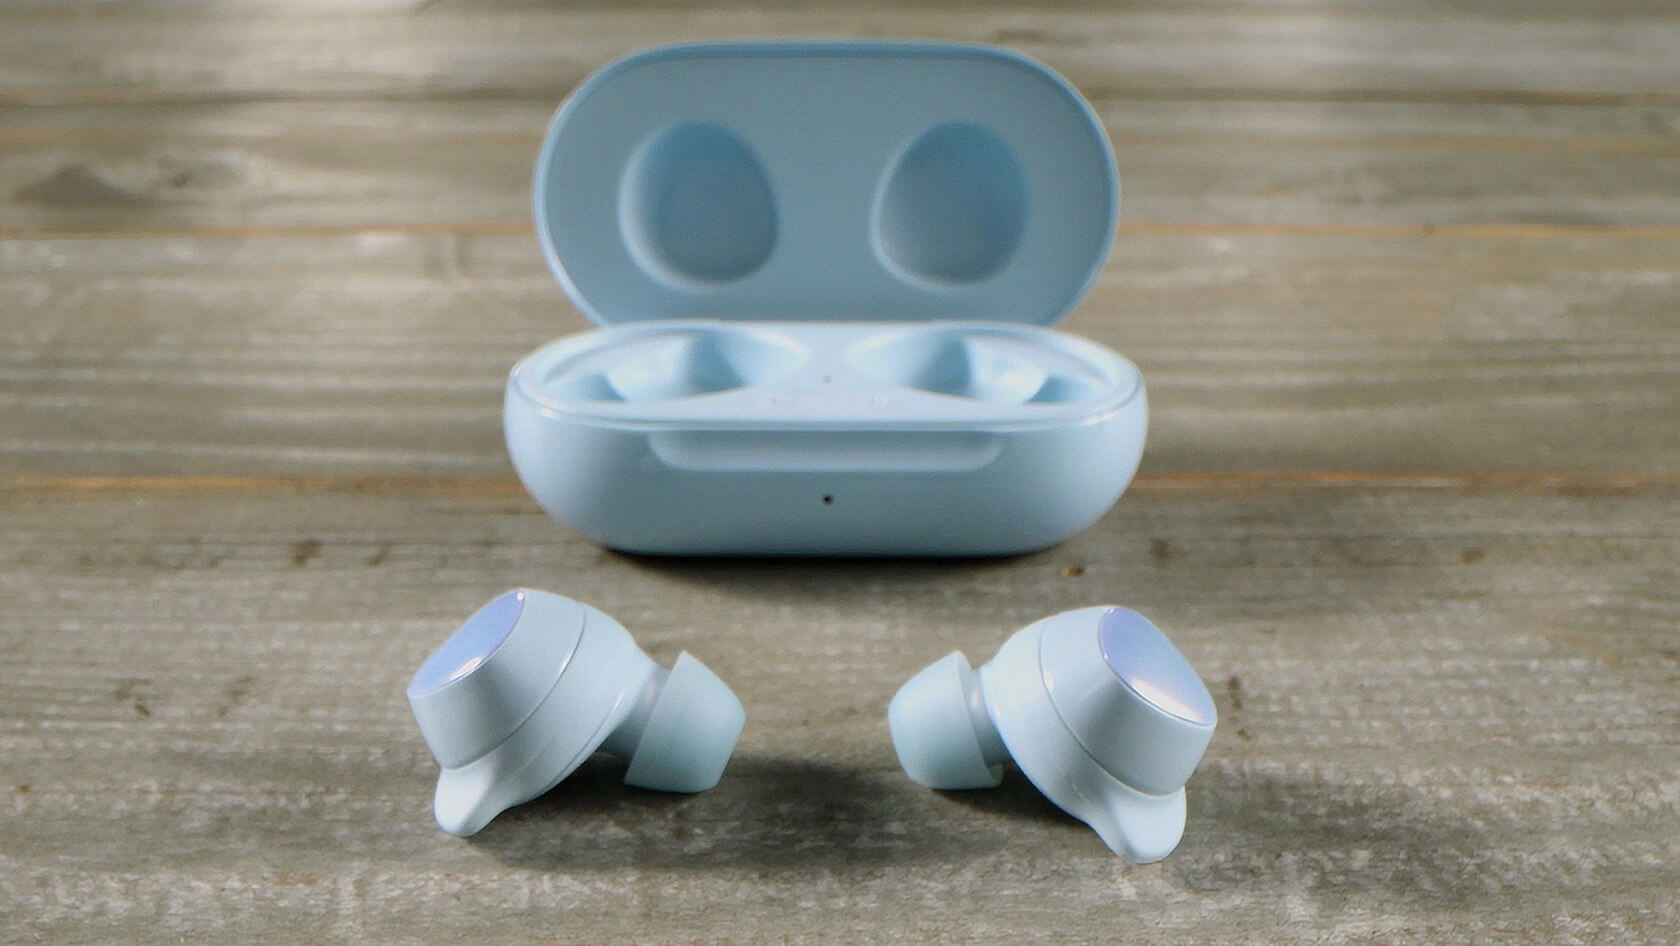 Samsung's next-gen Galaxy Buds+ offer better sound and improved iOS compatibility for $150